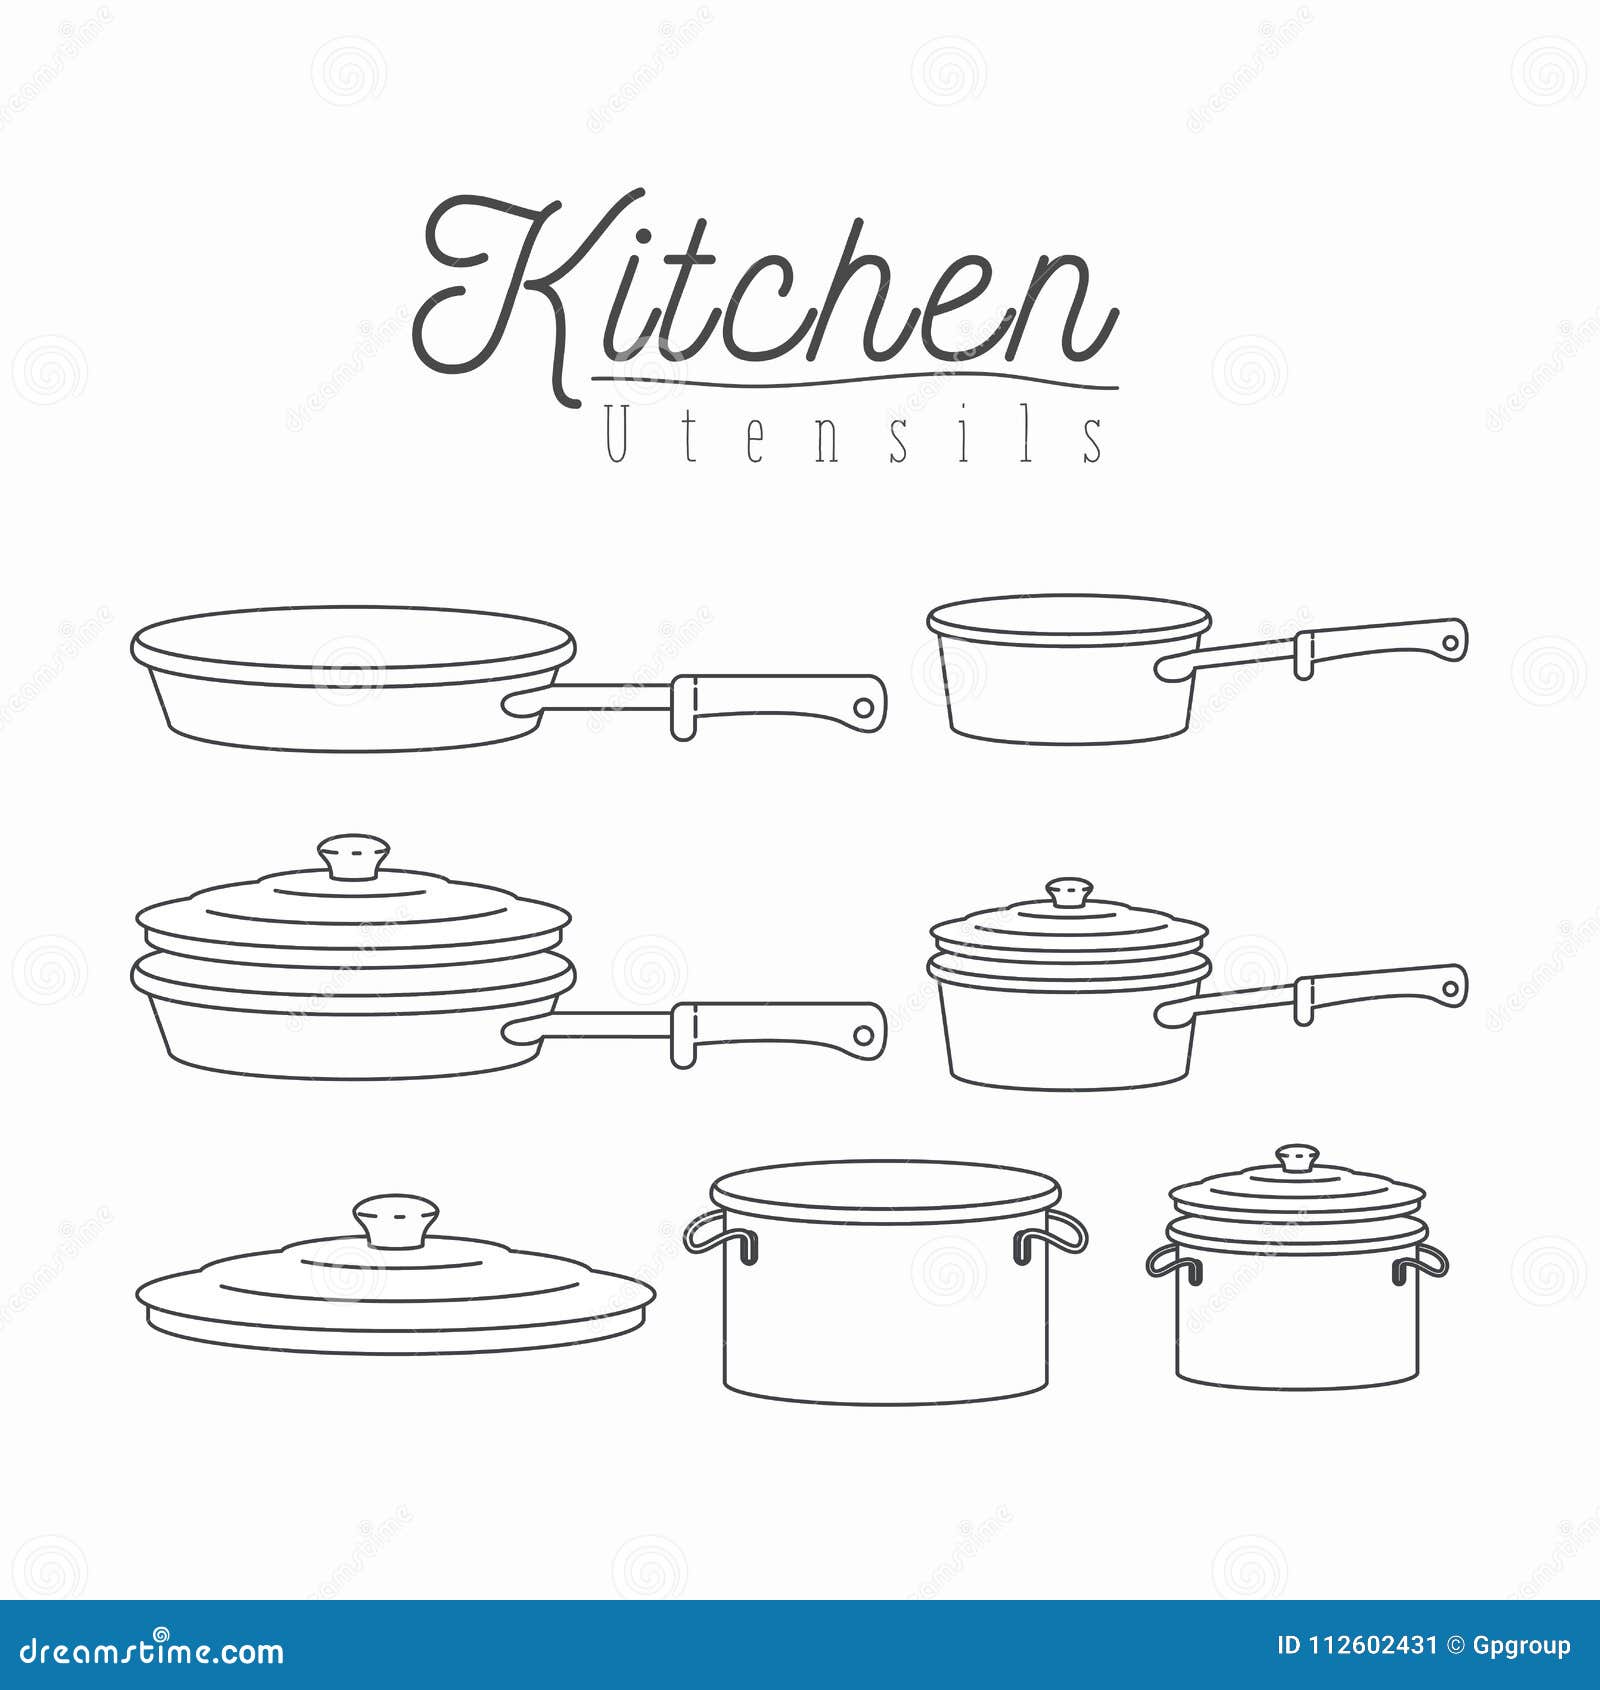 white background with silhouette set of kitchen pots and pans with lids kitchen utensils